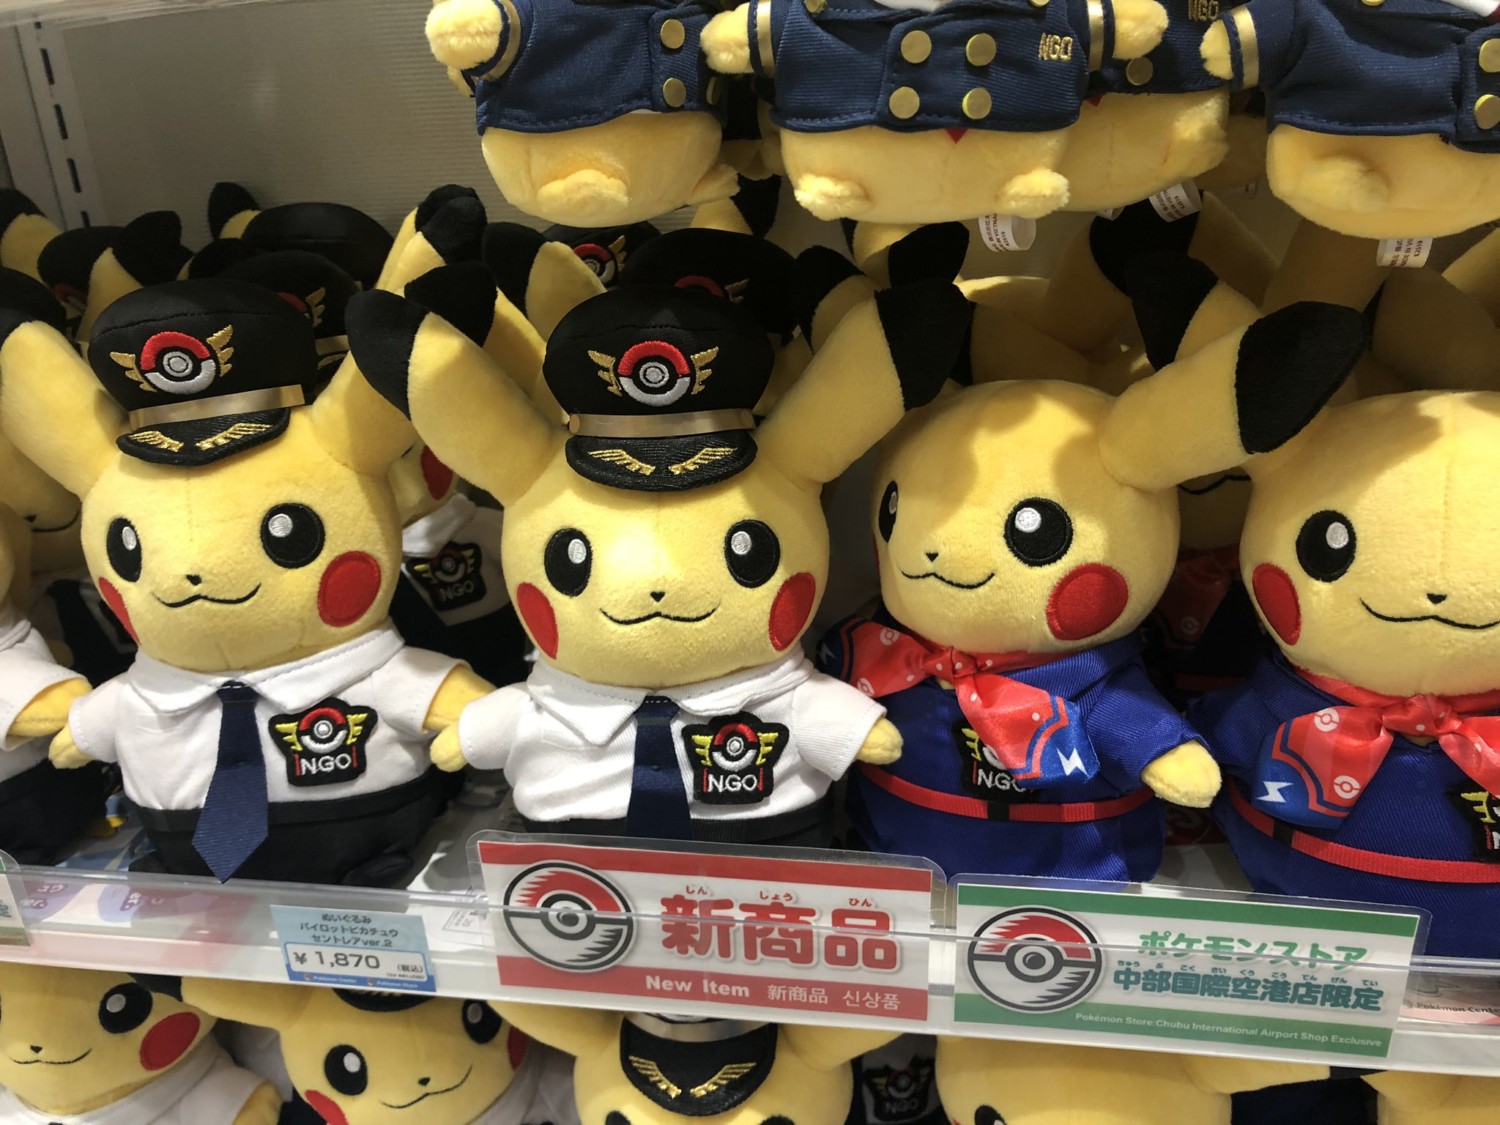 New Pilot And Air Stewardess Pikachu Plushies Rolled Out At More Pokemon Stores Nintendosoup